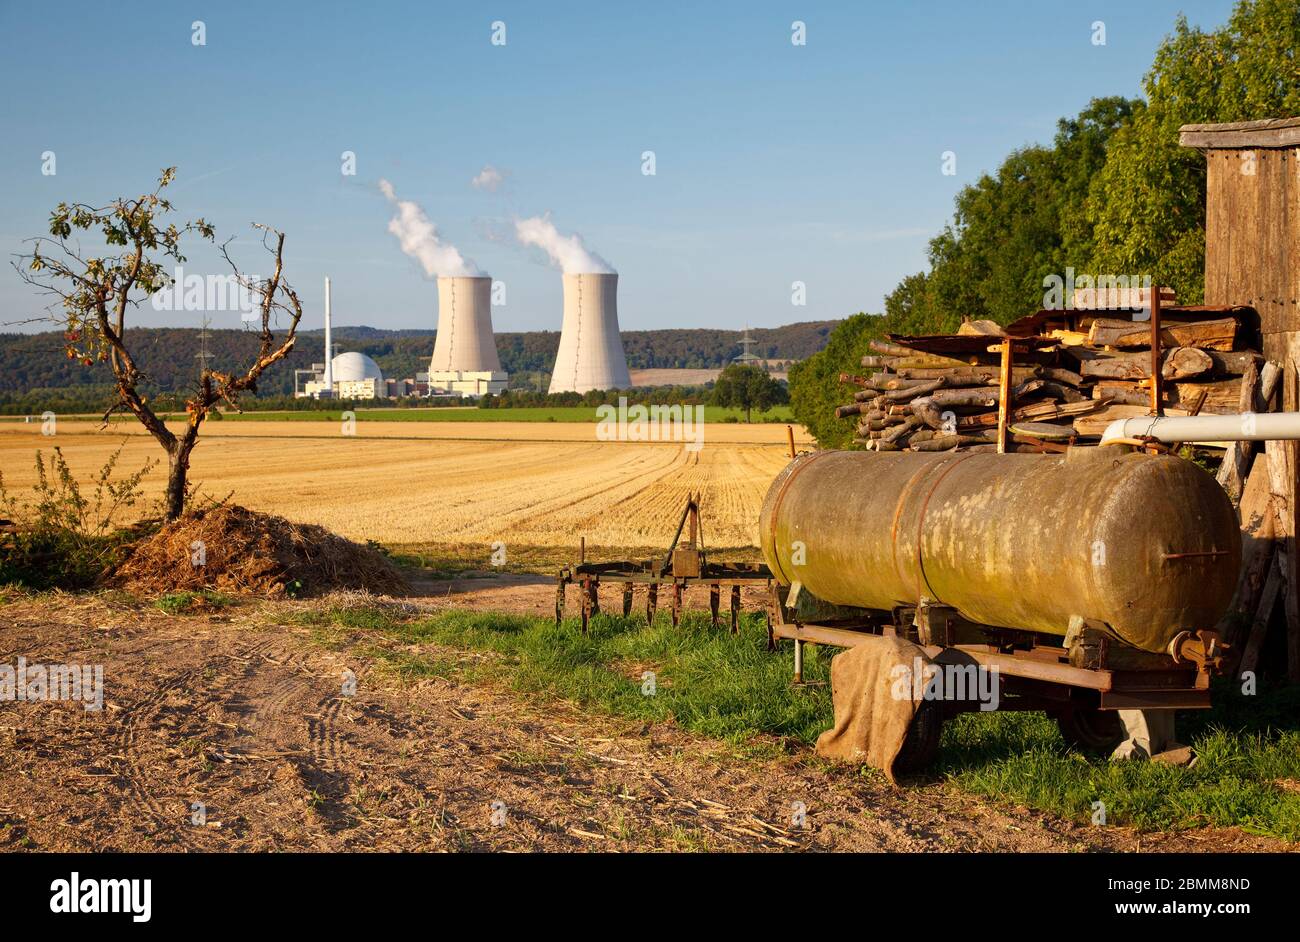 An apple tree and old agricultural machines in the foreground of a nuclear power plant, contrast between nature and environmental damage. Stock Photo